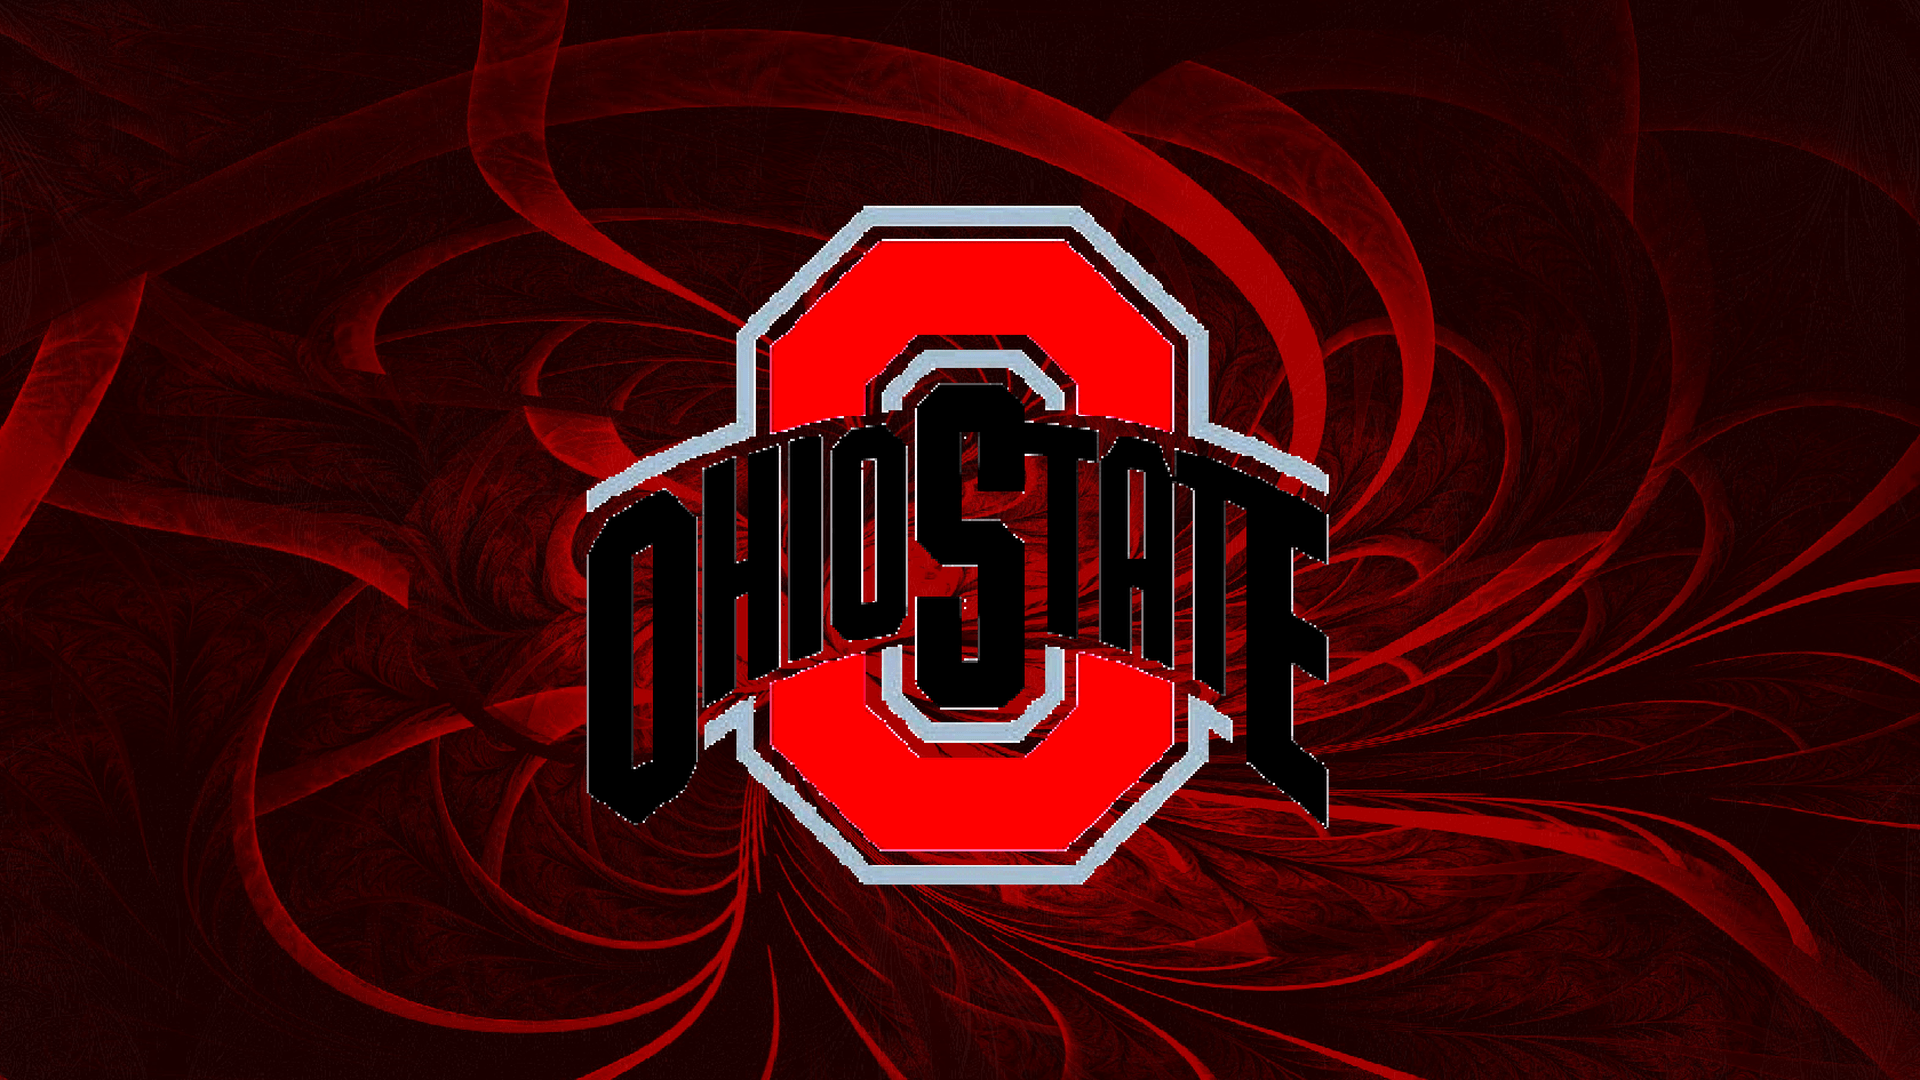 Ohio State Logo - Ohio State Buckeyes images ATHLETIC LOGO #5 HD wallpaper and ...